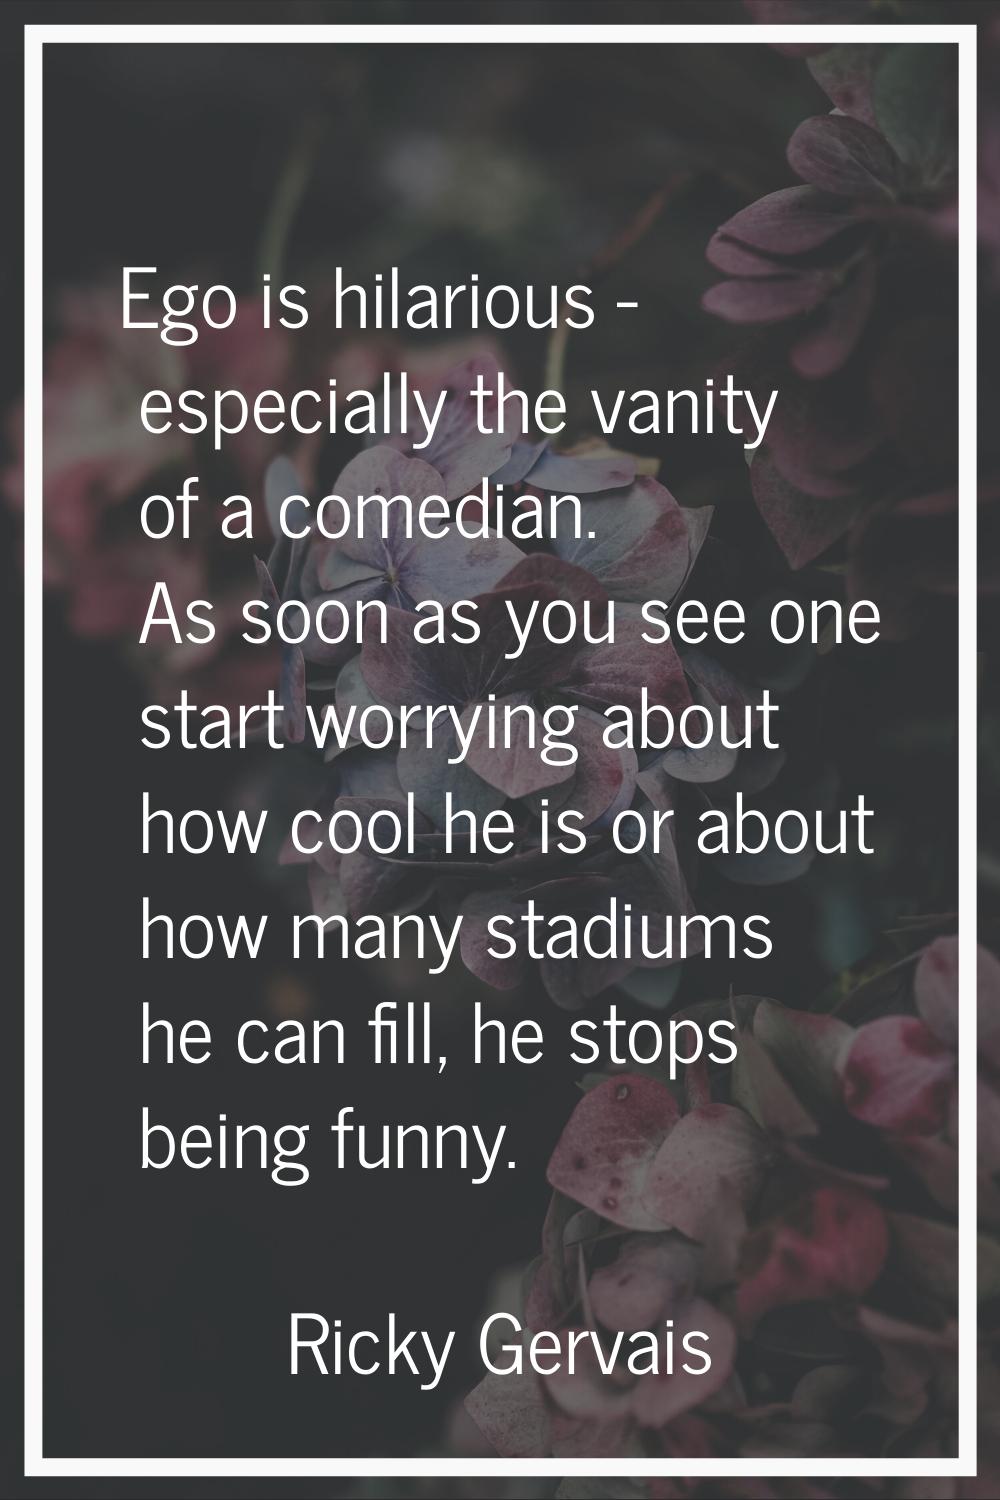 Ego is hilarious - especially the vanity of a comedian. As soon as you see one start worrying about